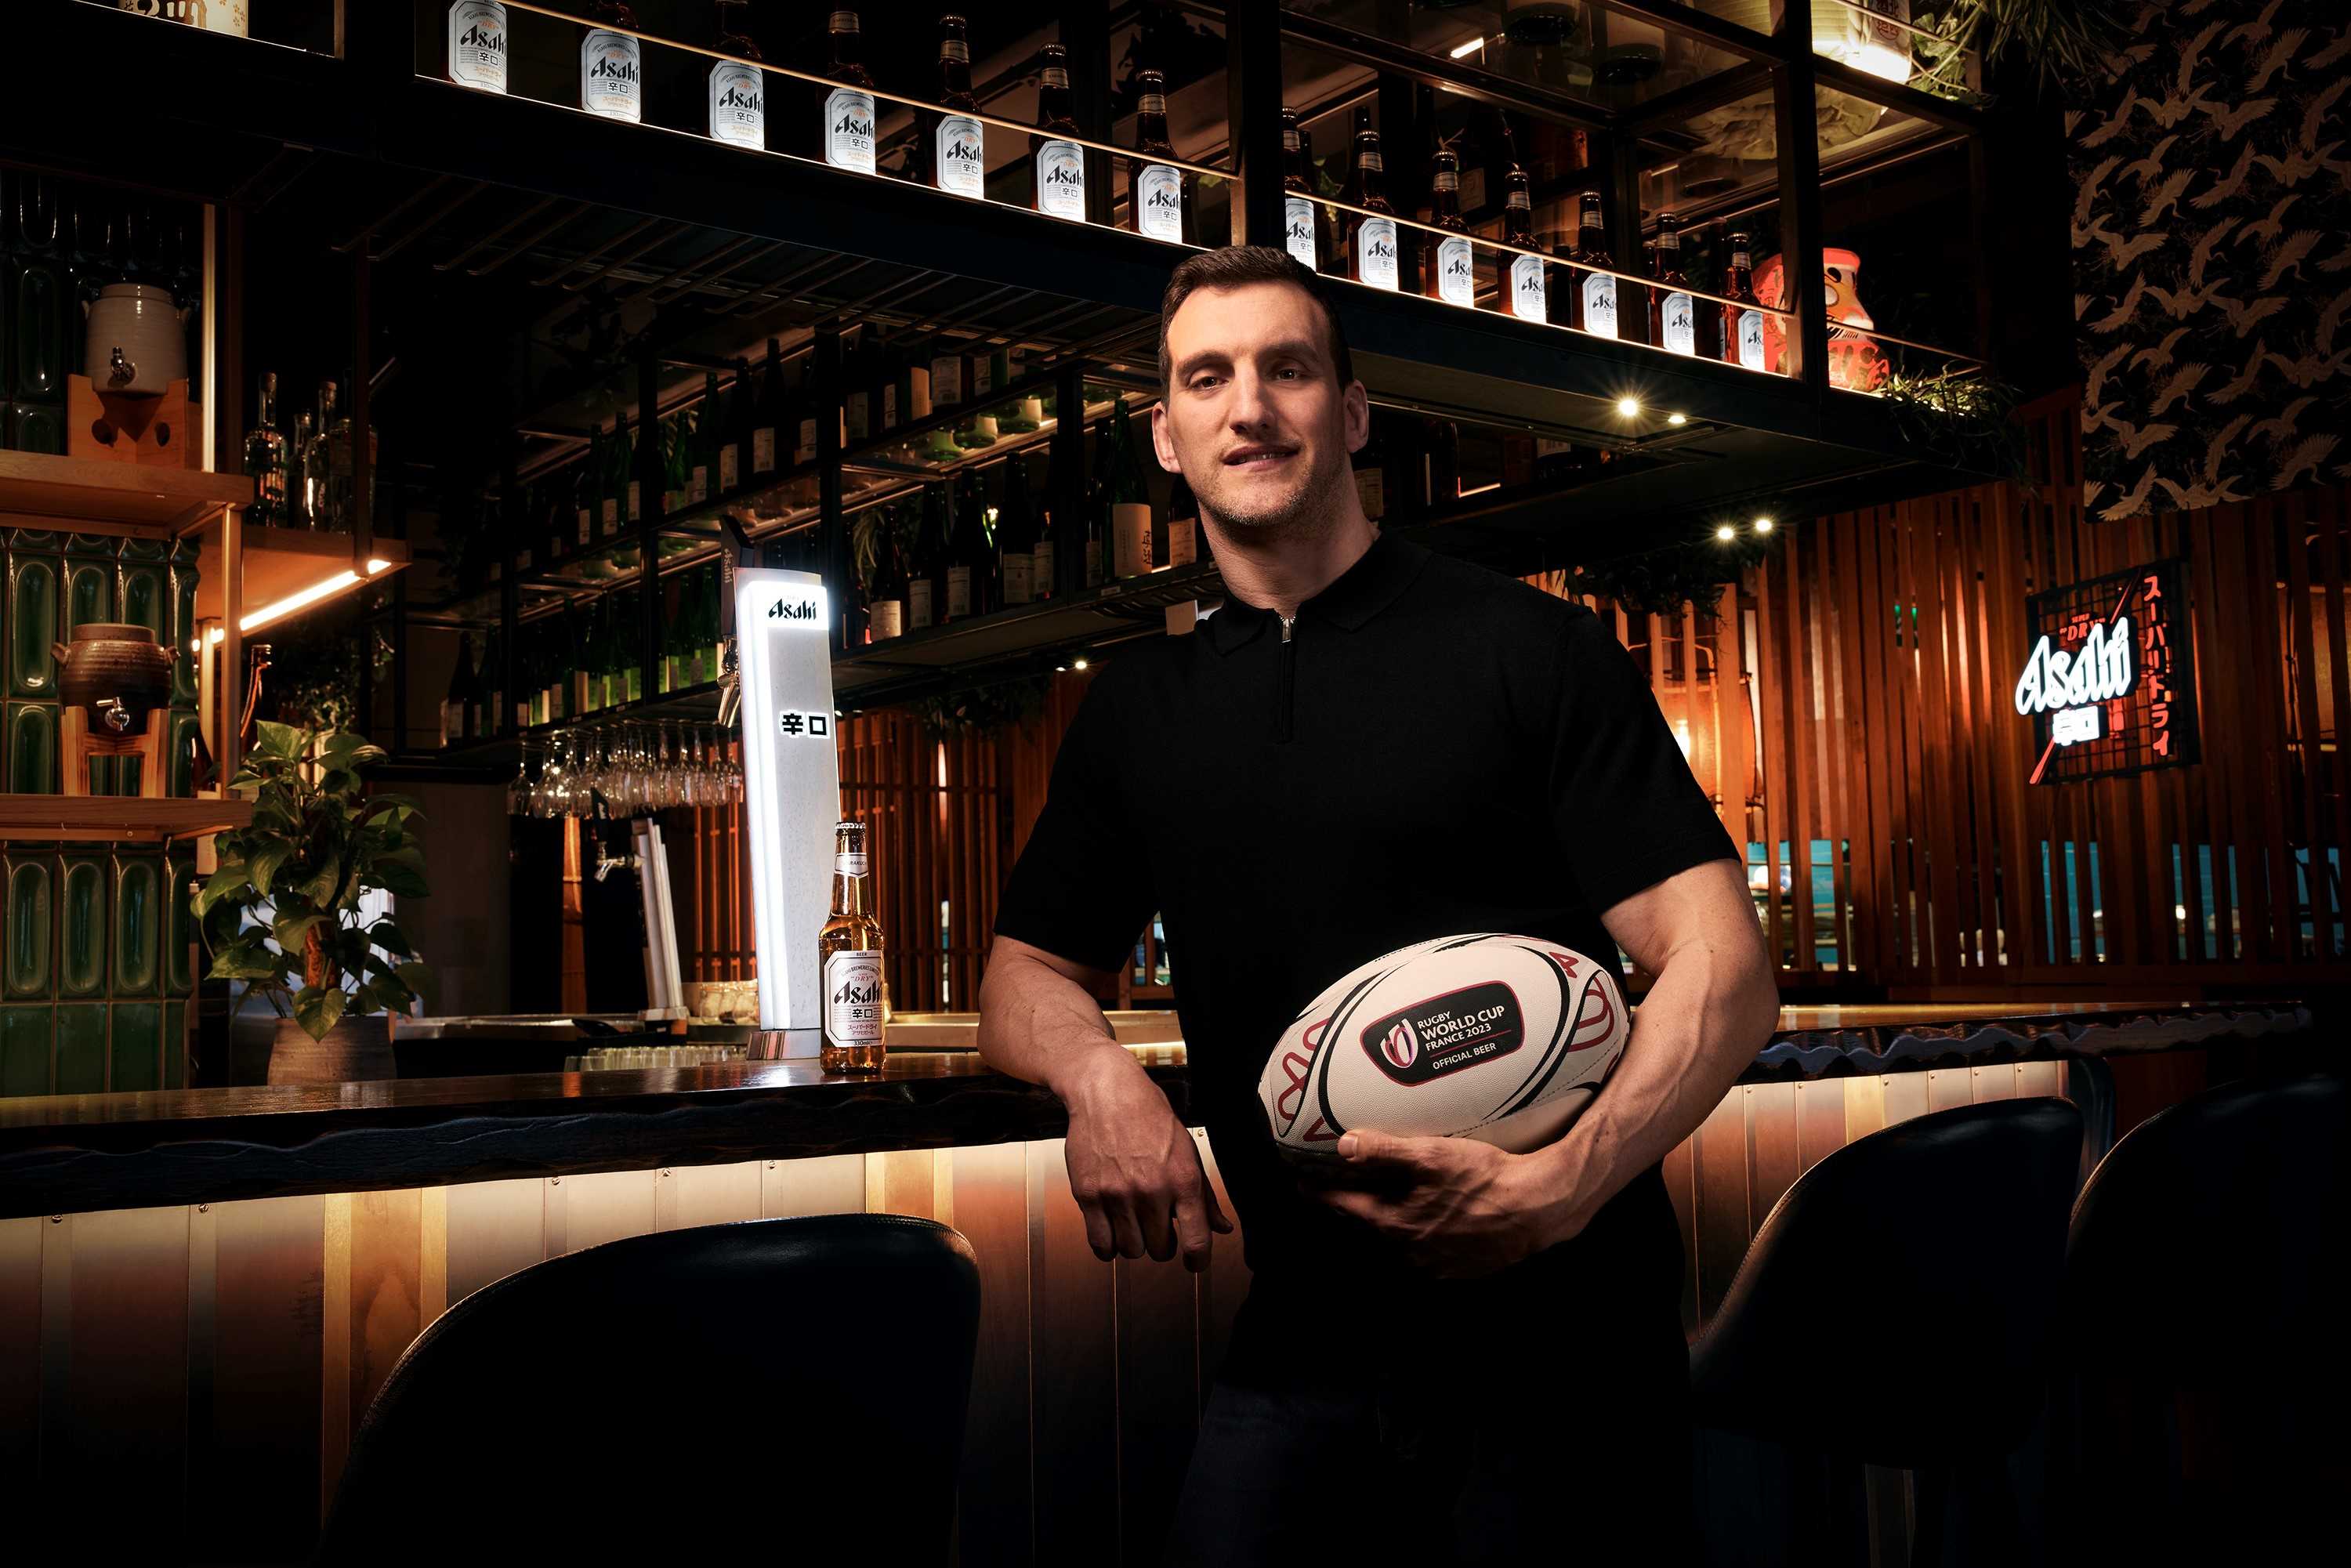 Sam Warburton believes Ireland will take the World Cup by storm